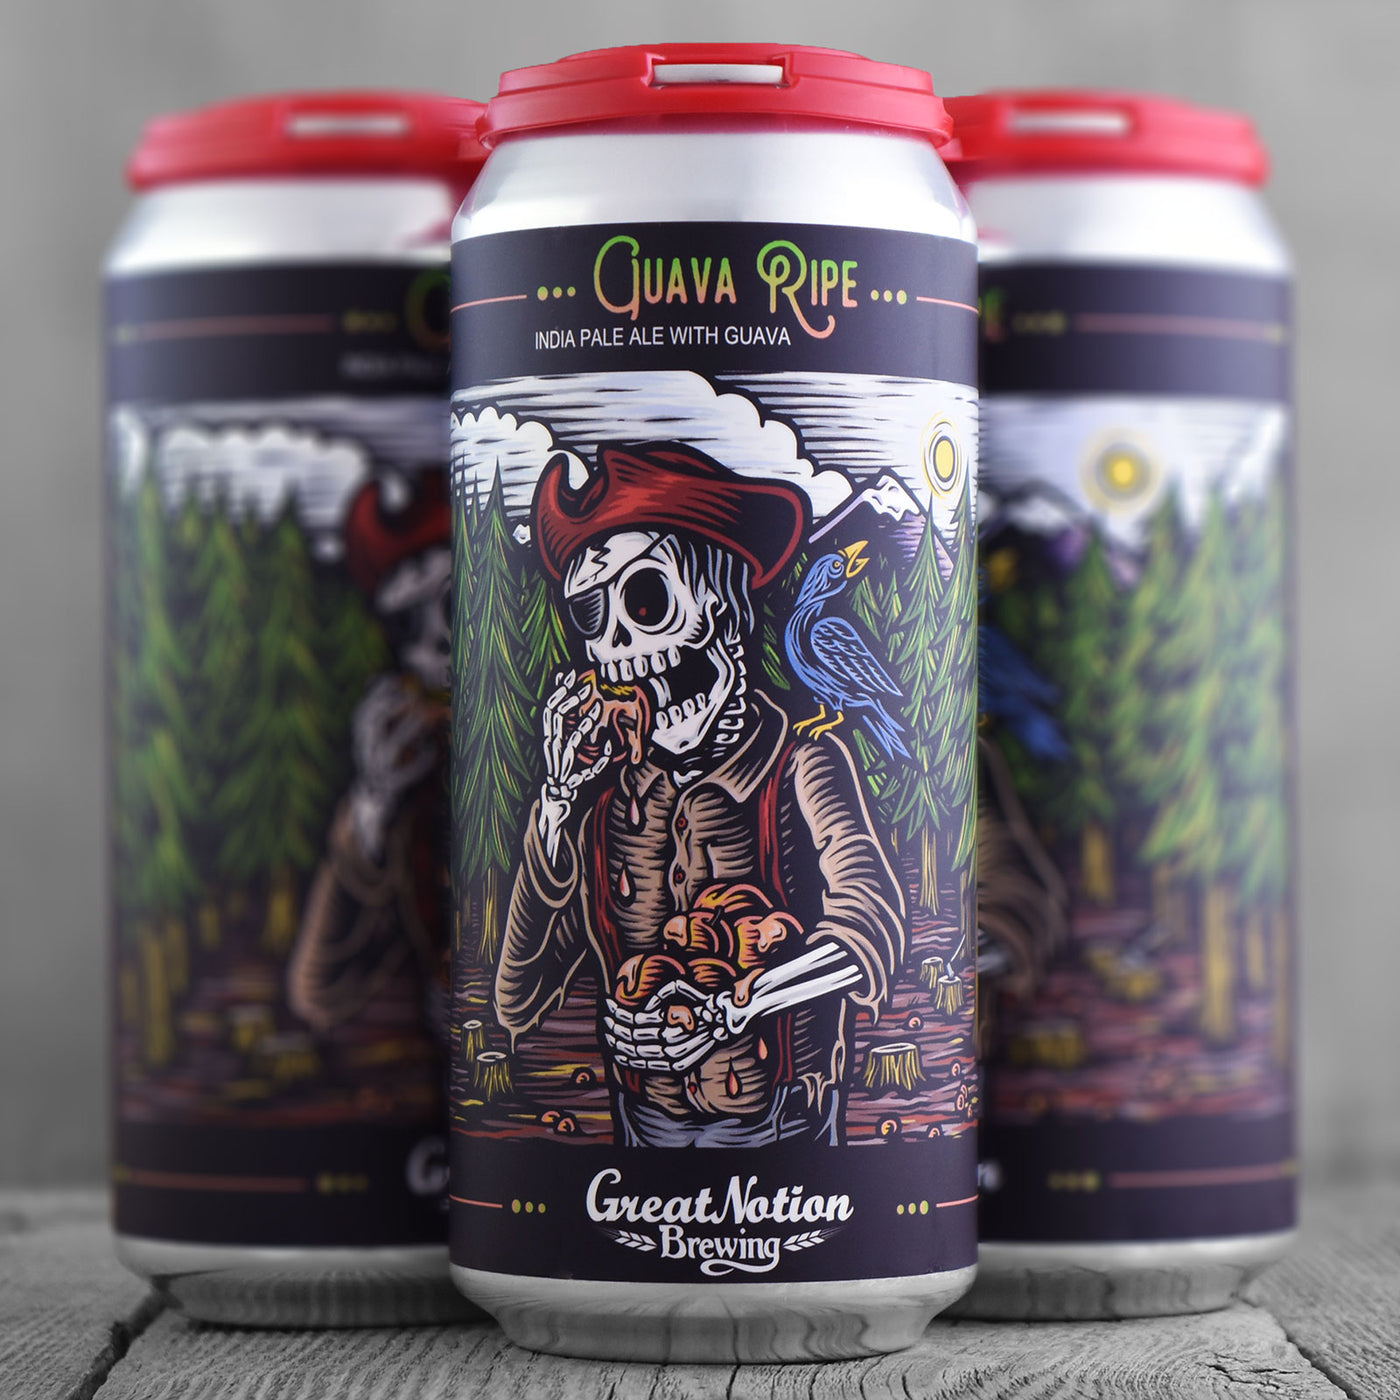 Great Notion Guava Ripe - Limit 1